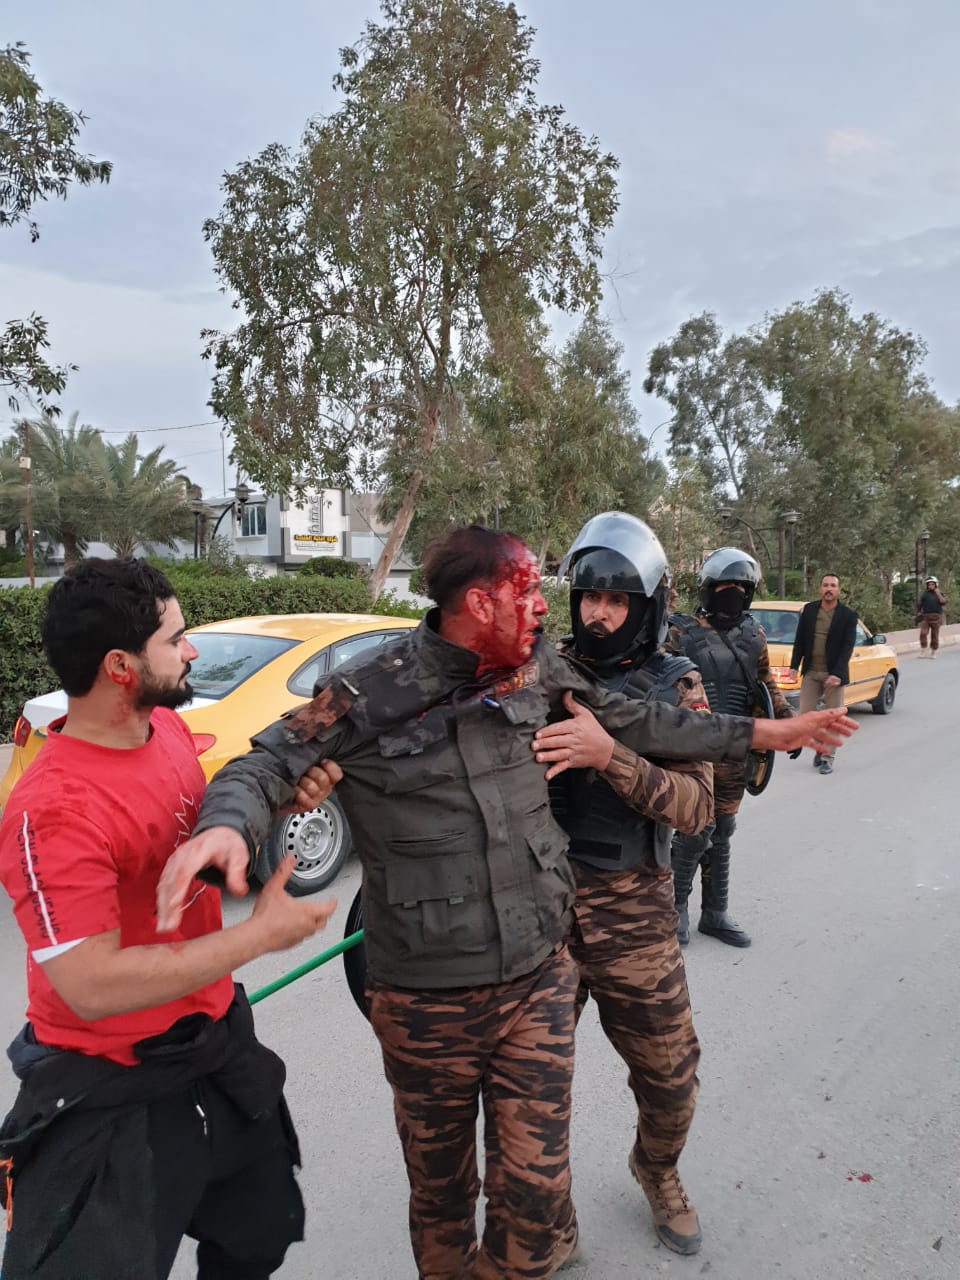 Dhi Qar police called for end to the “assaults” in Nasiriya